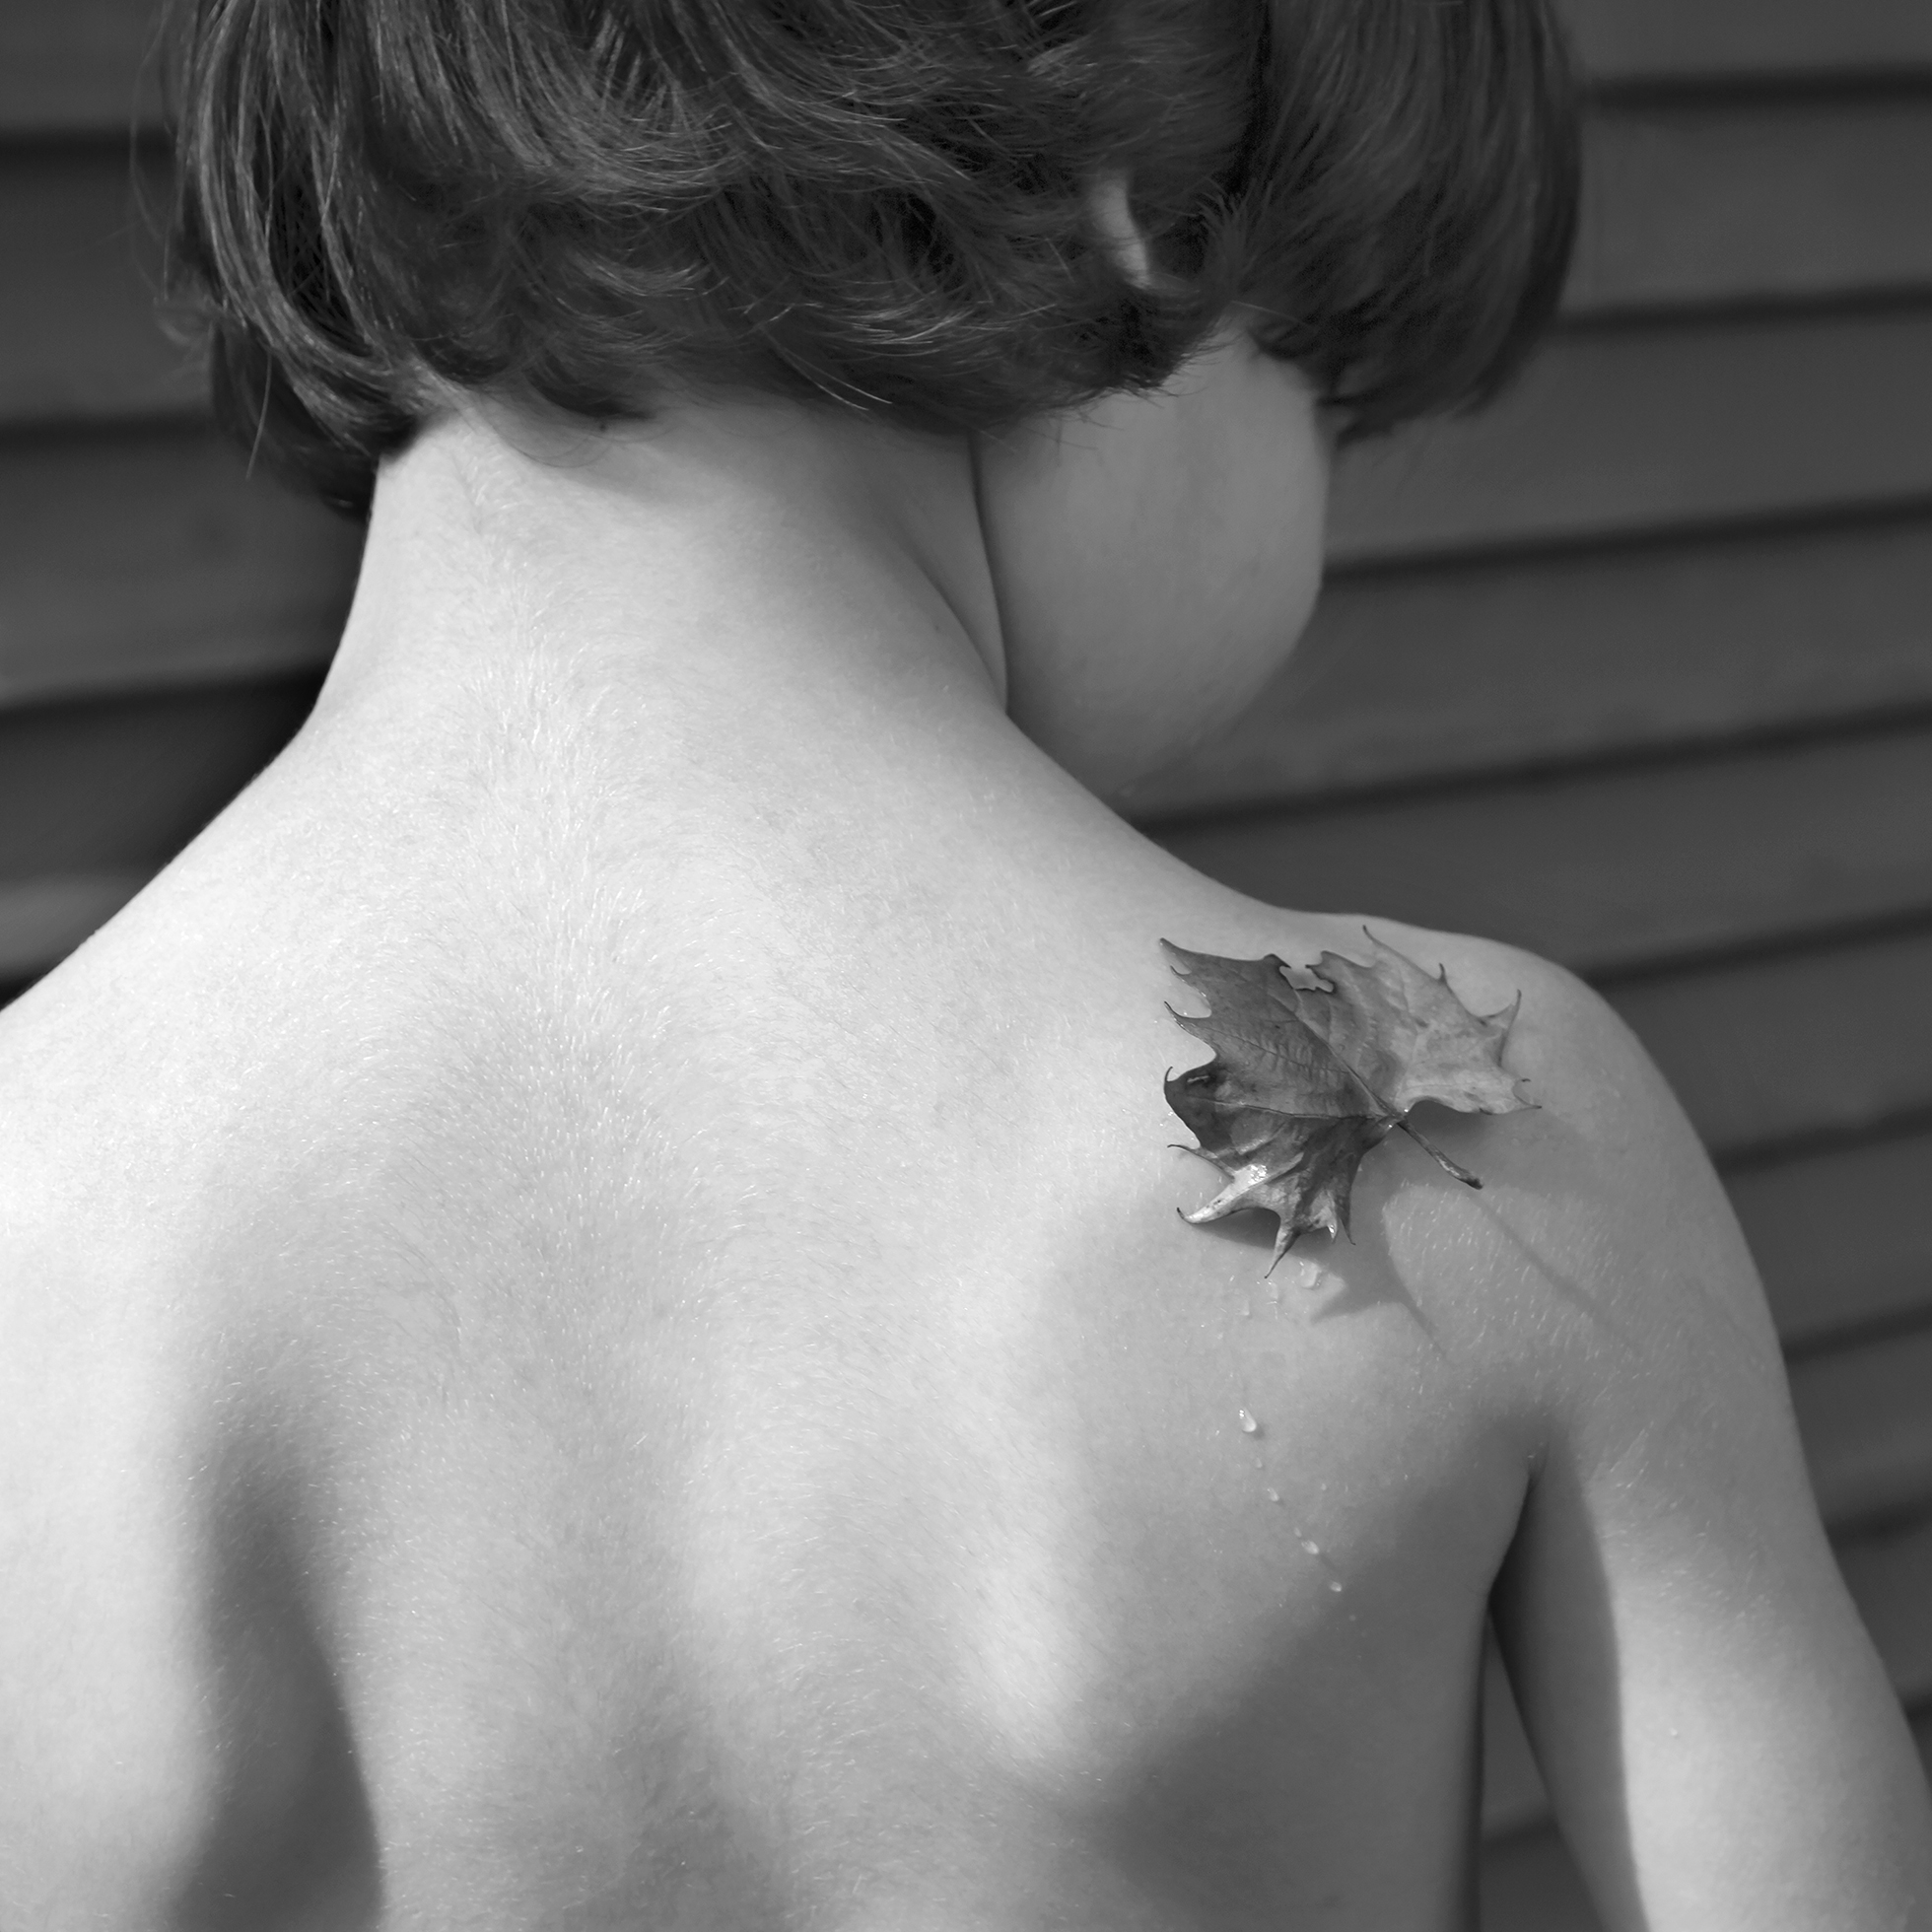 A child with short brown hair stands in front of a structure with siding. The child is seen from behind from bare shoulder blades to almost the top of the head. A wet maple leaf has settled on the right shoulder with water droplets on the skin below.